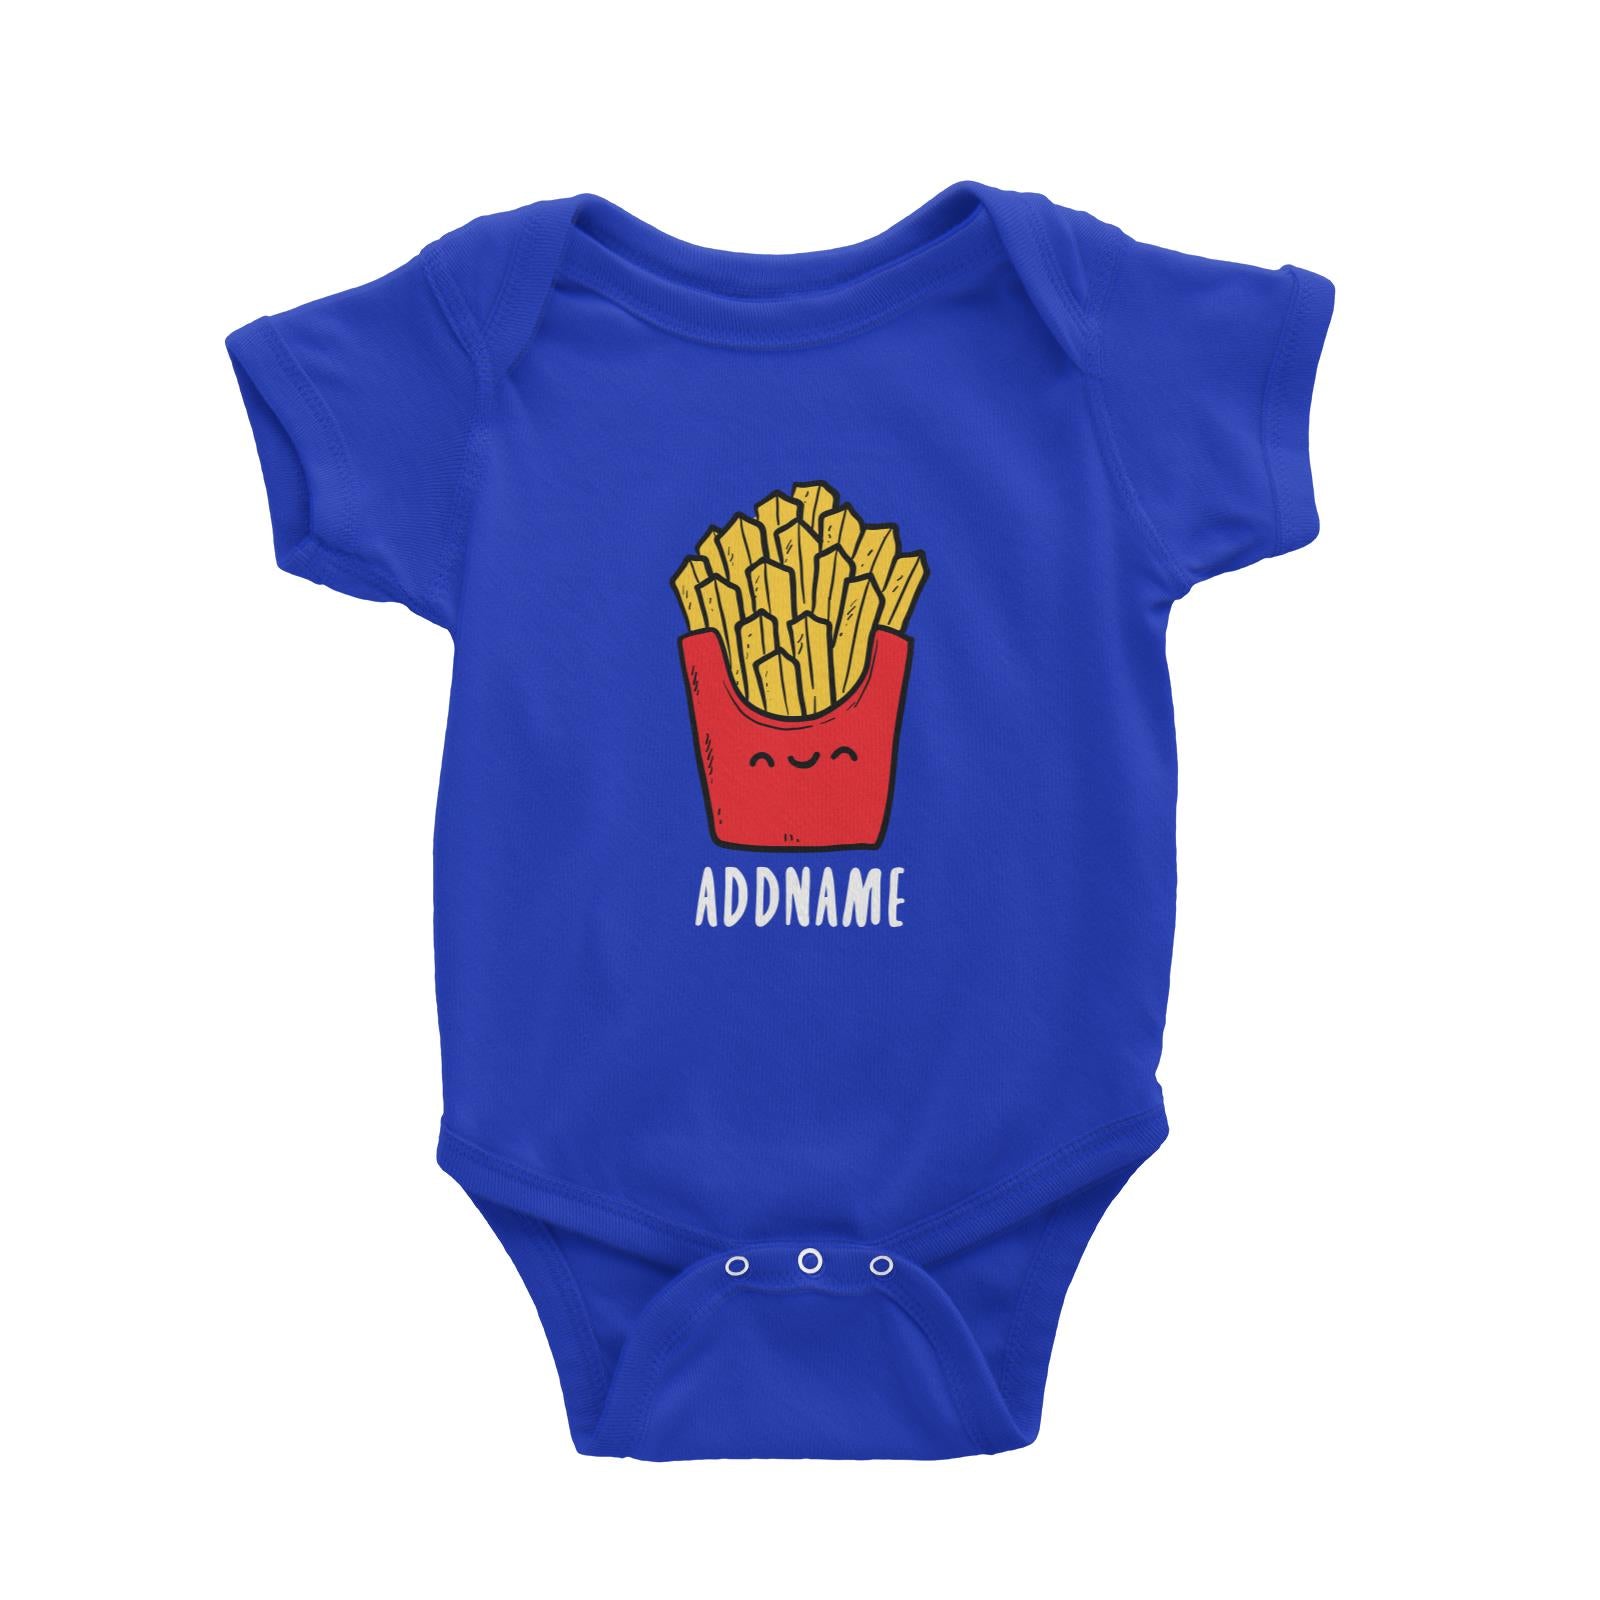 Fast Food Fries Addname Baby Romper  Matching Family Comic Cartoon Personalizable Designs